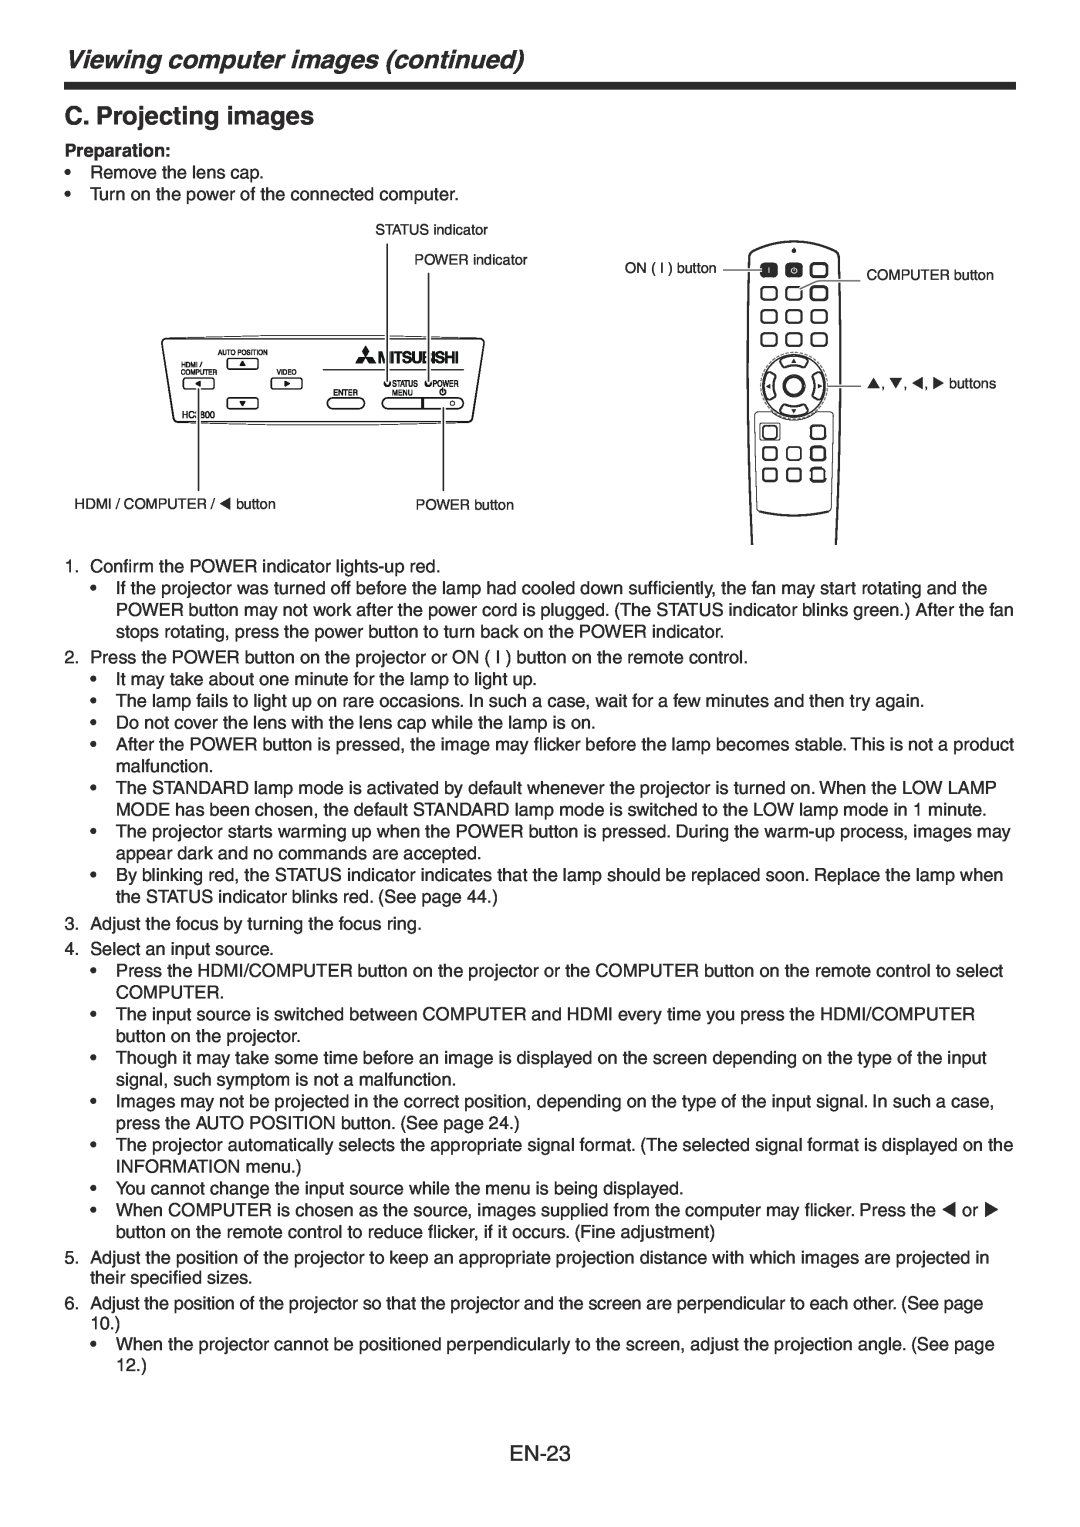 Mitsubishi Electronics HC3800 user manual Viewing computer images continued, C. Projecting images, EN-23, Preparation 